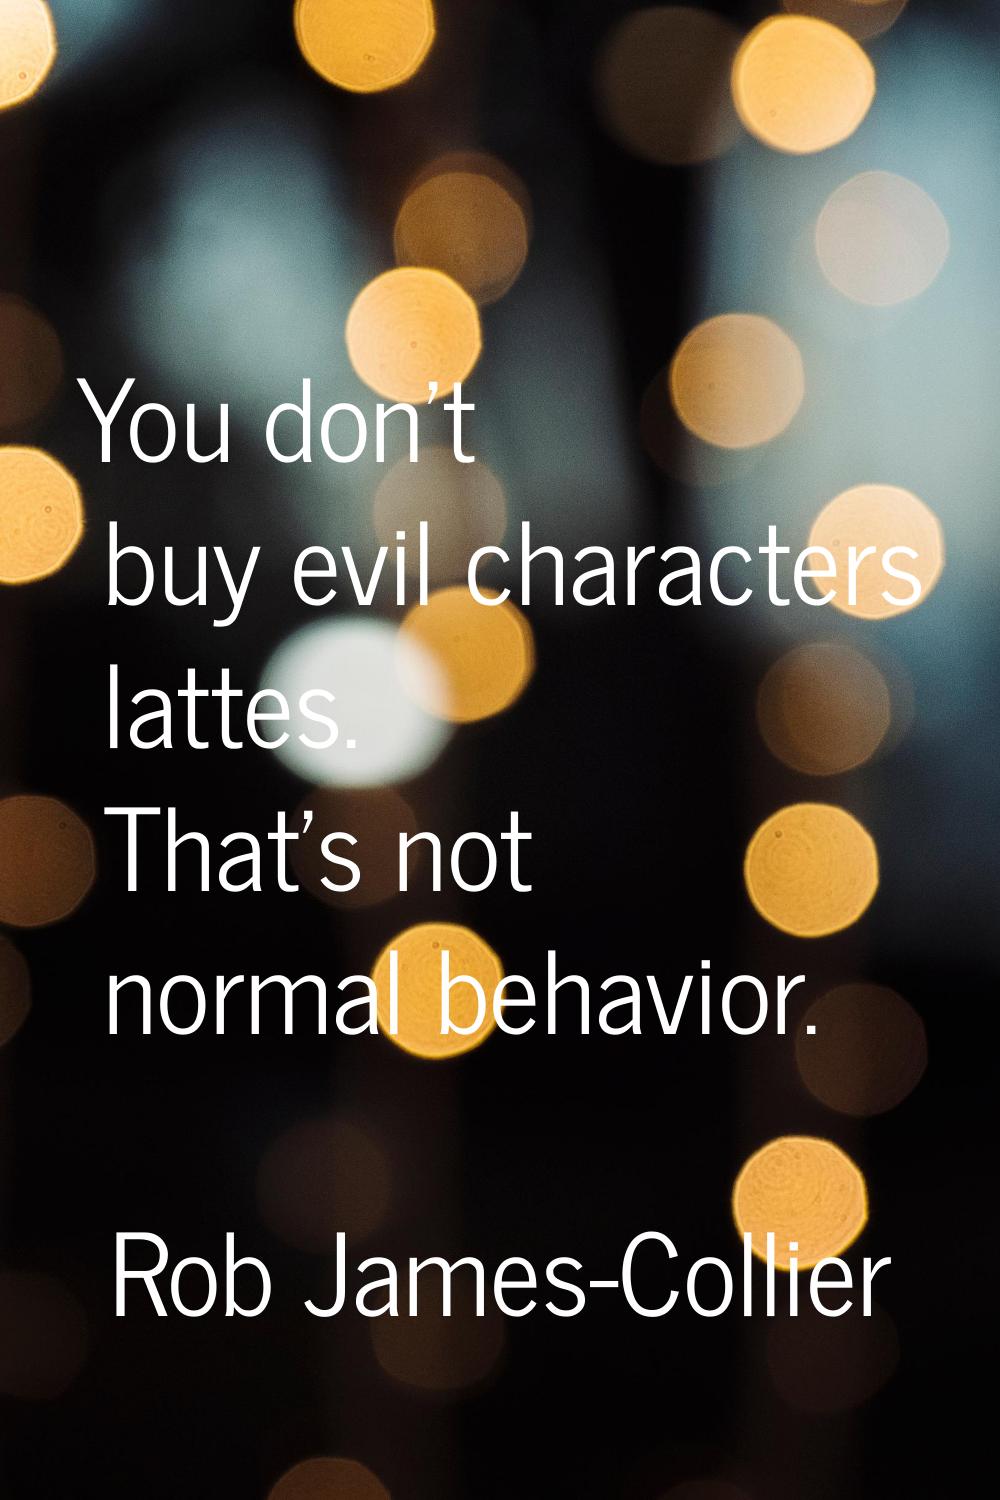 You don't buy evil characters lattes. That's not normal behavior.